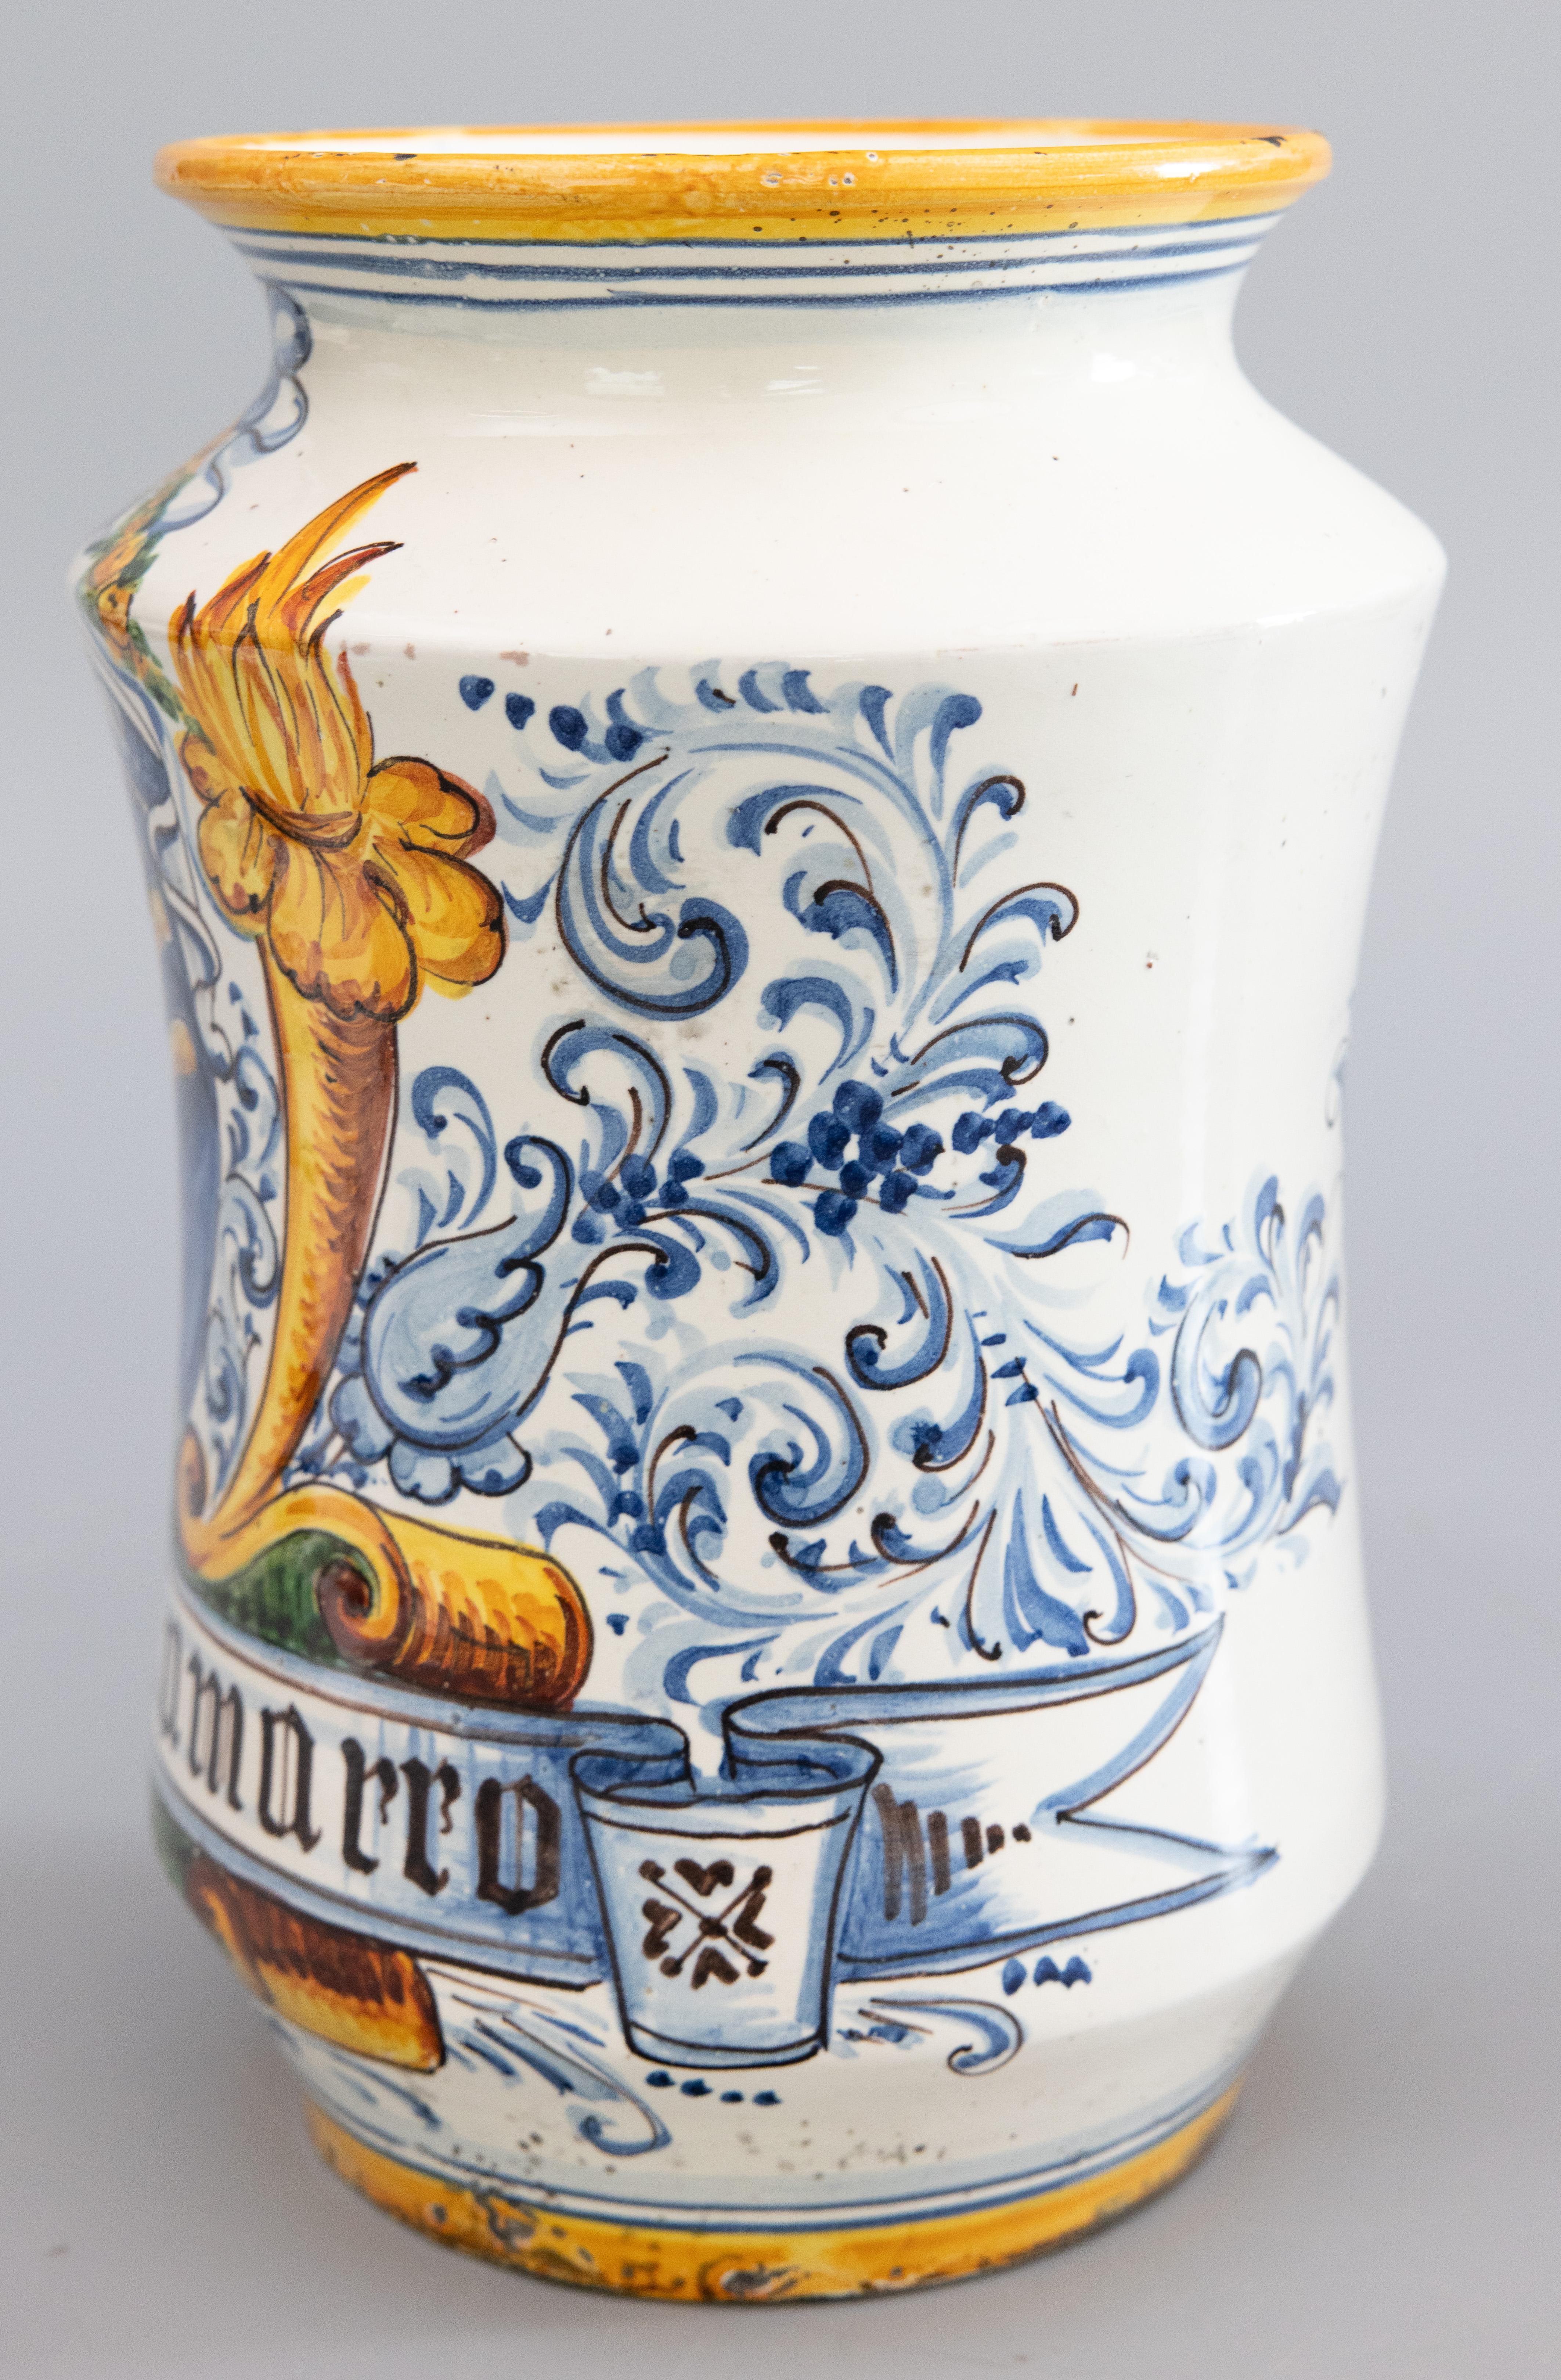 A lovely antique 19th-Century Italian faience albarello or apothecary pharmacy jar. This fine jar has a hand painted lion surrounded by ornamental scrolls in vibrant colors. It displays beautifully and would be wonderful used as a vase with a